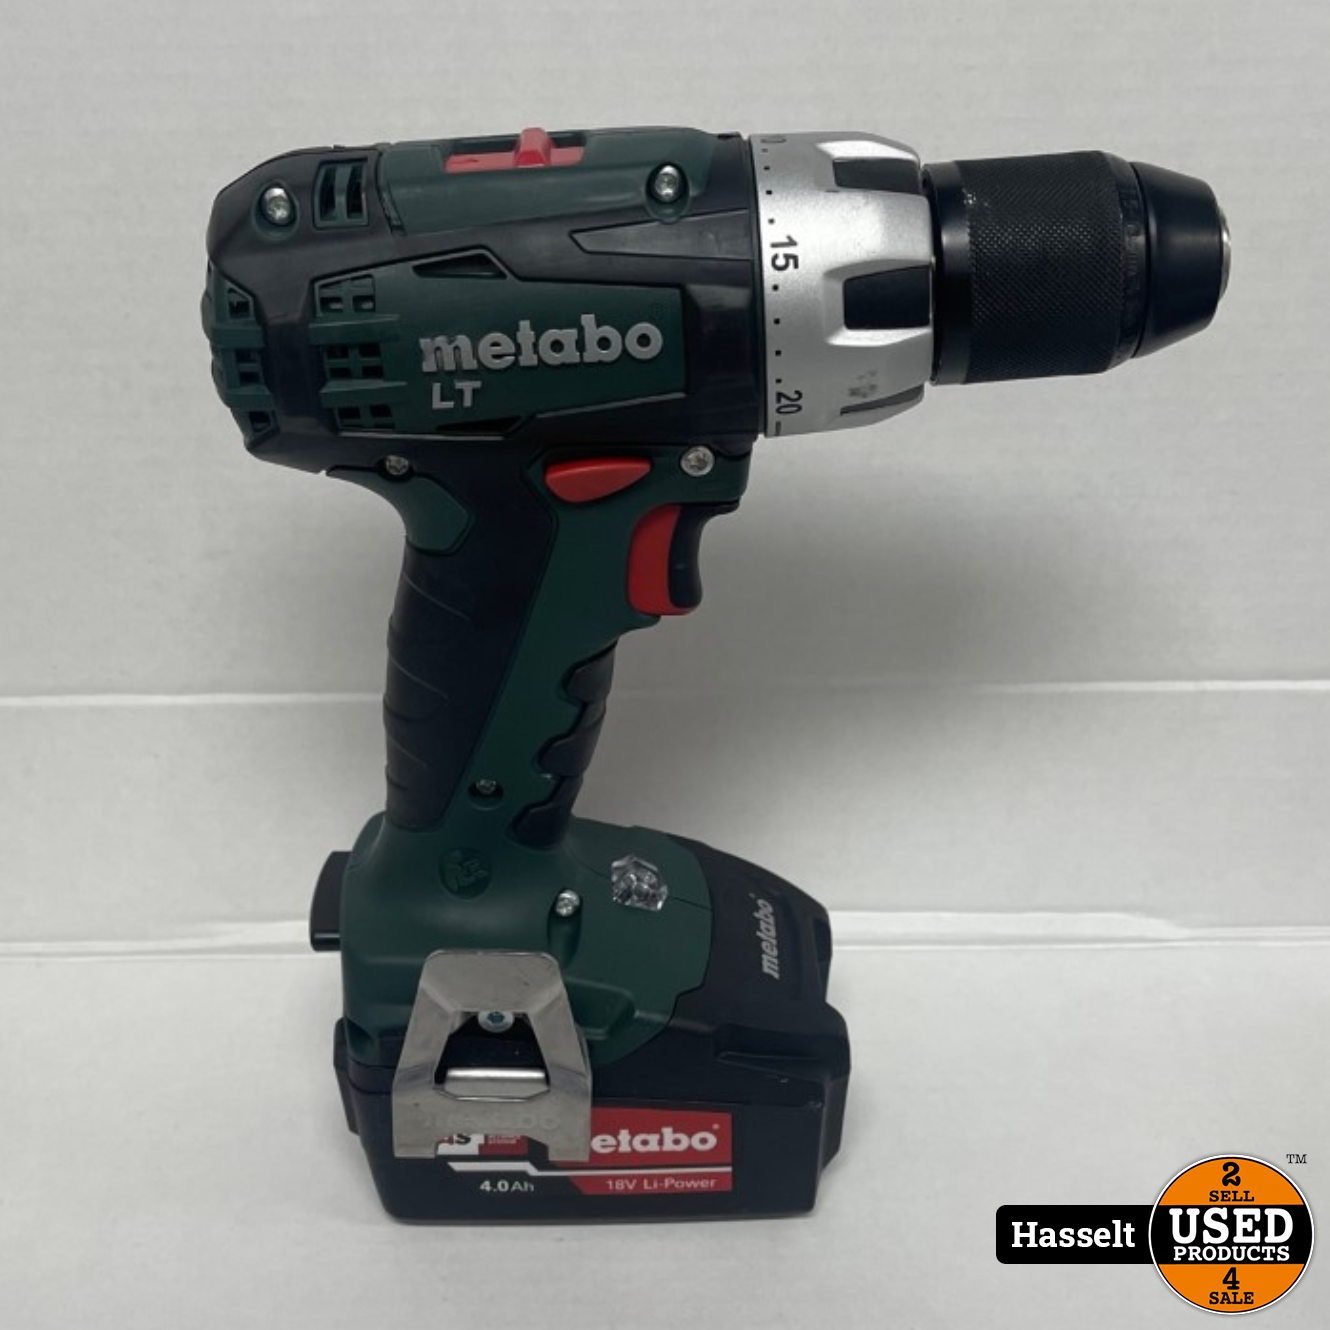 Metabo BS 18 LT met oplader + extra Compact accuboormachine - Used Products Hasselt